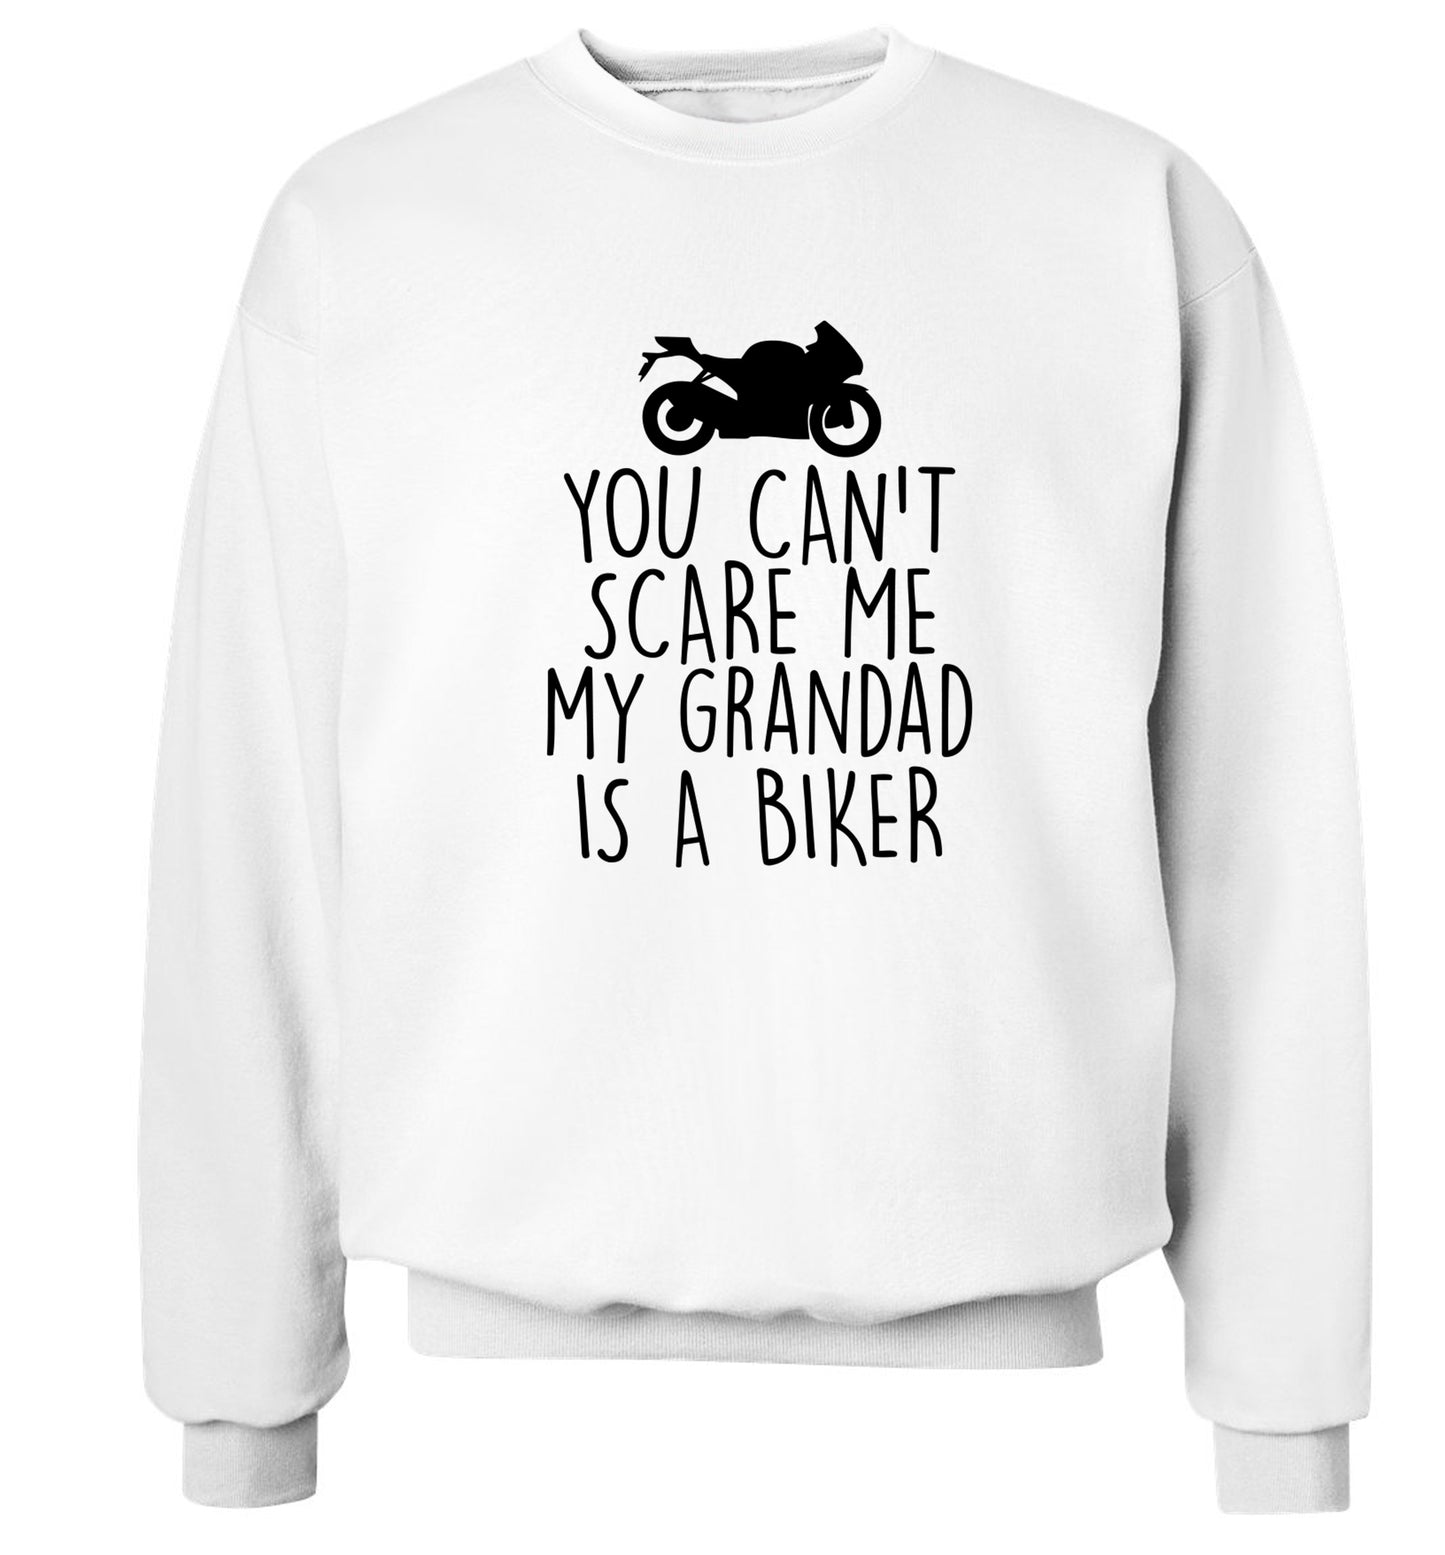 You can't scare me my grandad is a biker Adult's unisex white Sweater 2XL